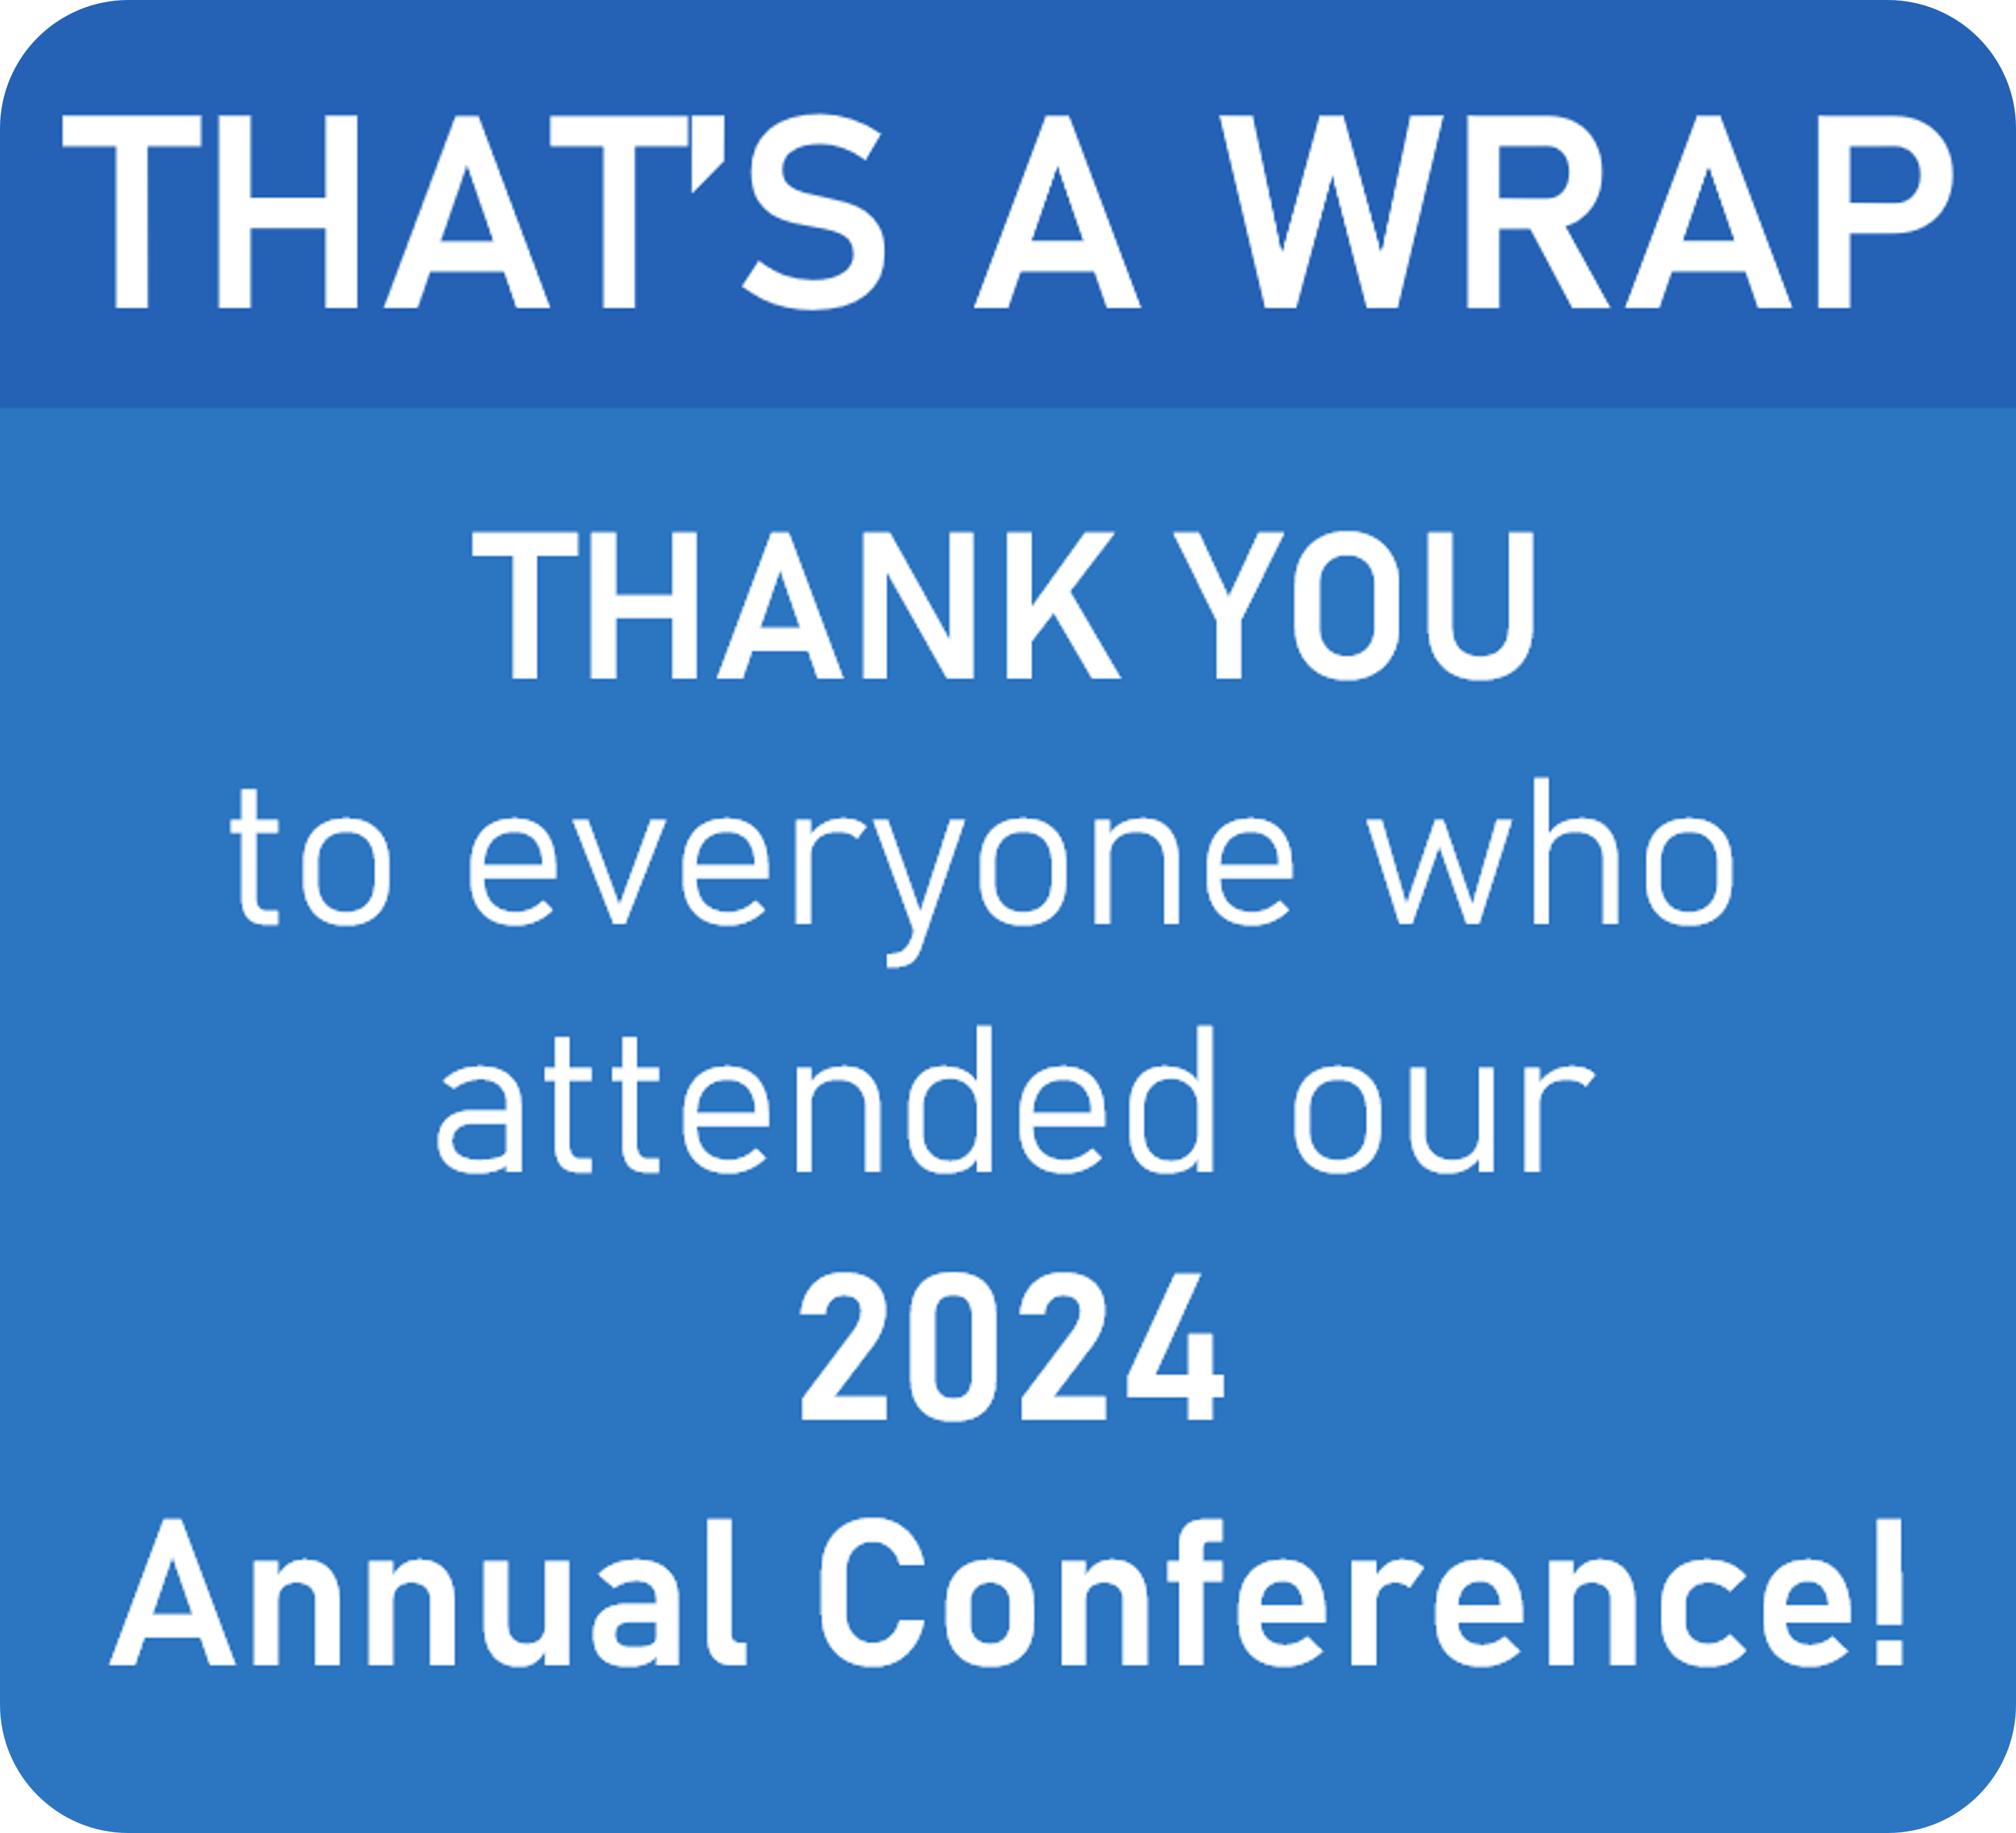 Completed 2024 Annual Conference